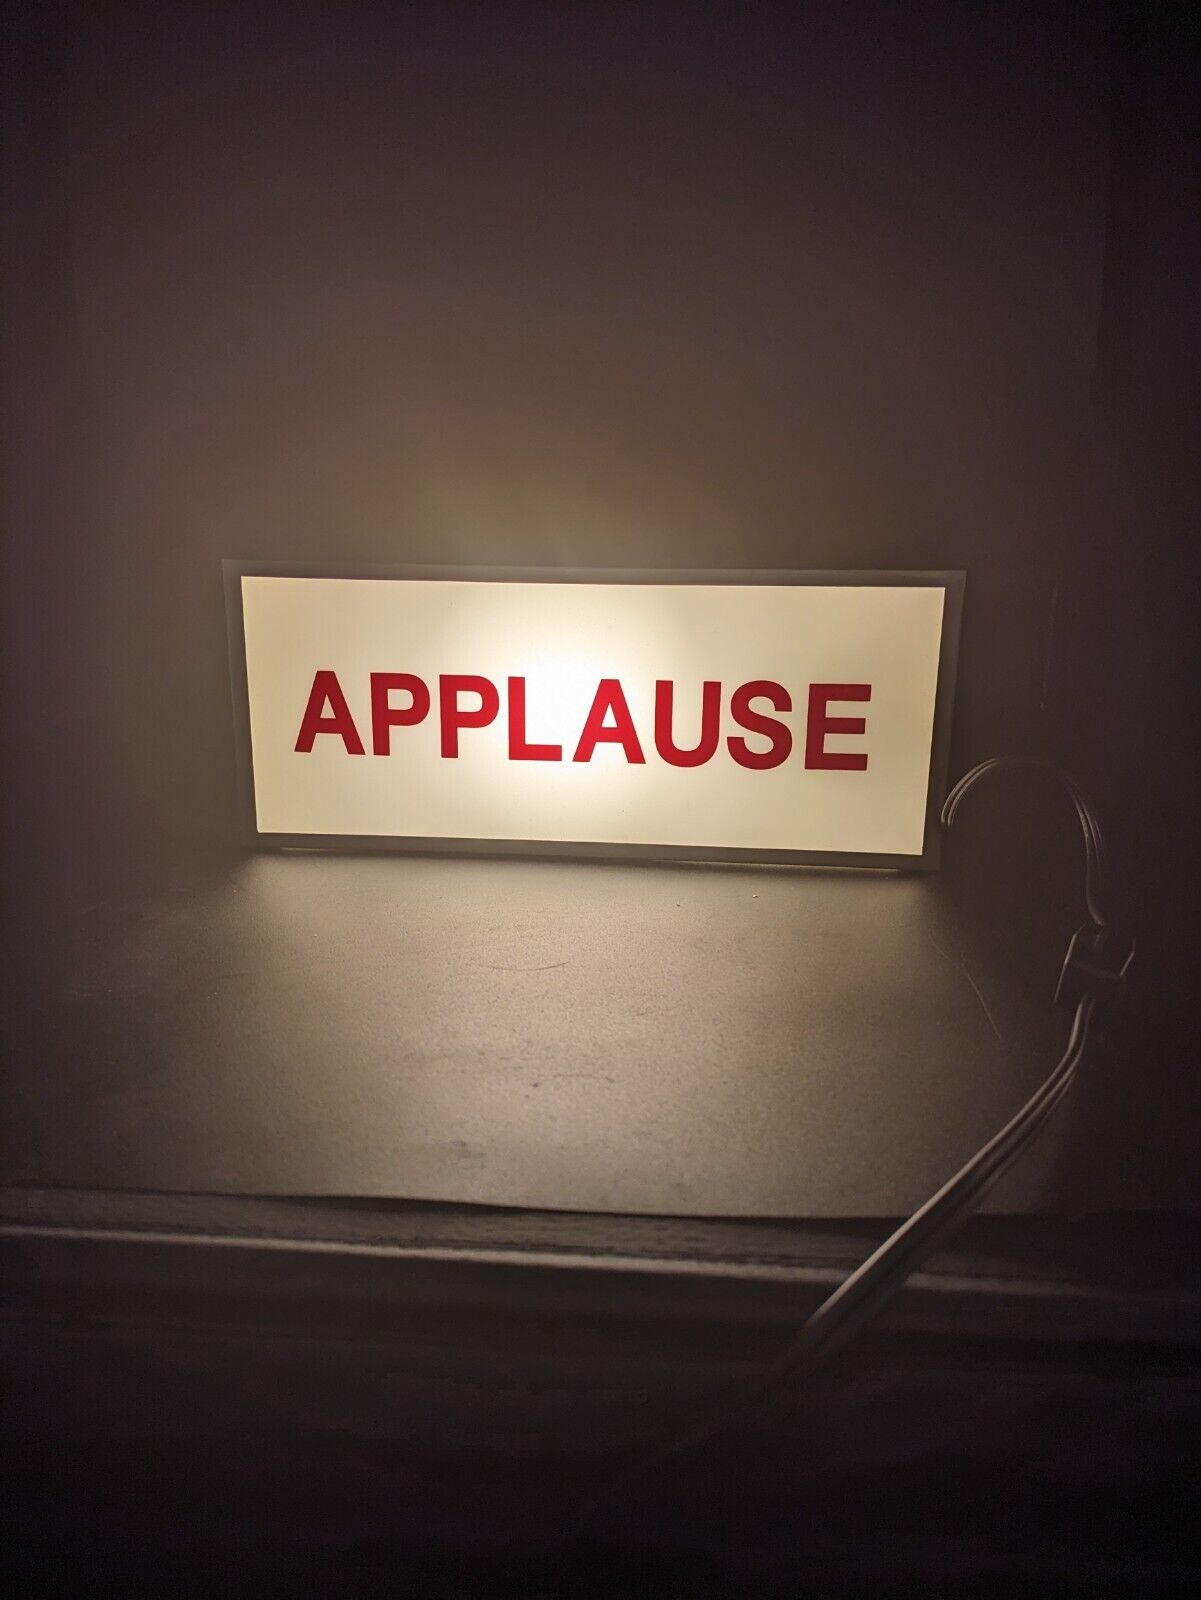 Applause Wall Hanging LED Light, Studio Lamp For Movie Theater Room & Home Decor